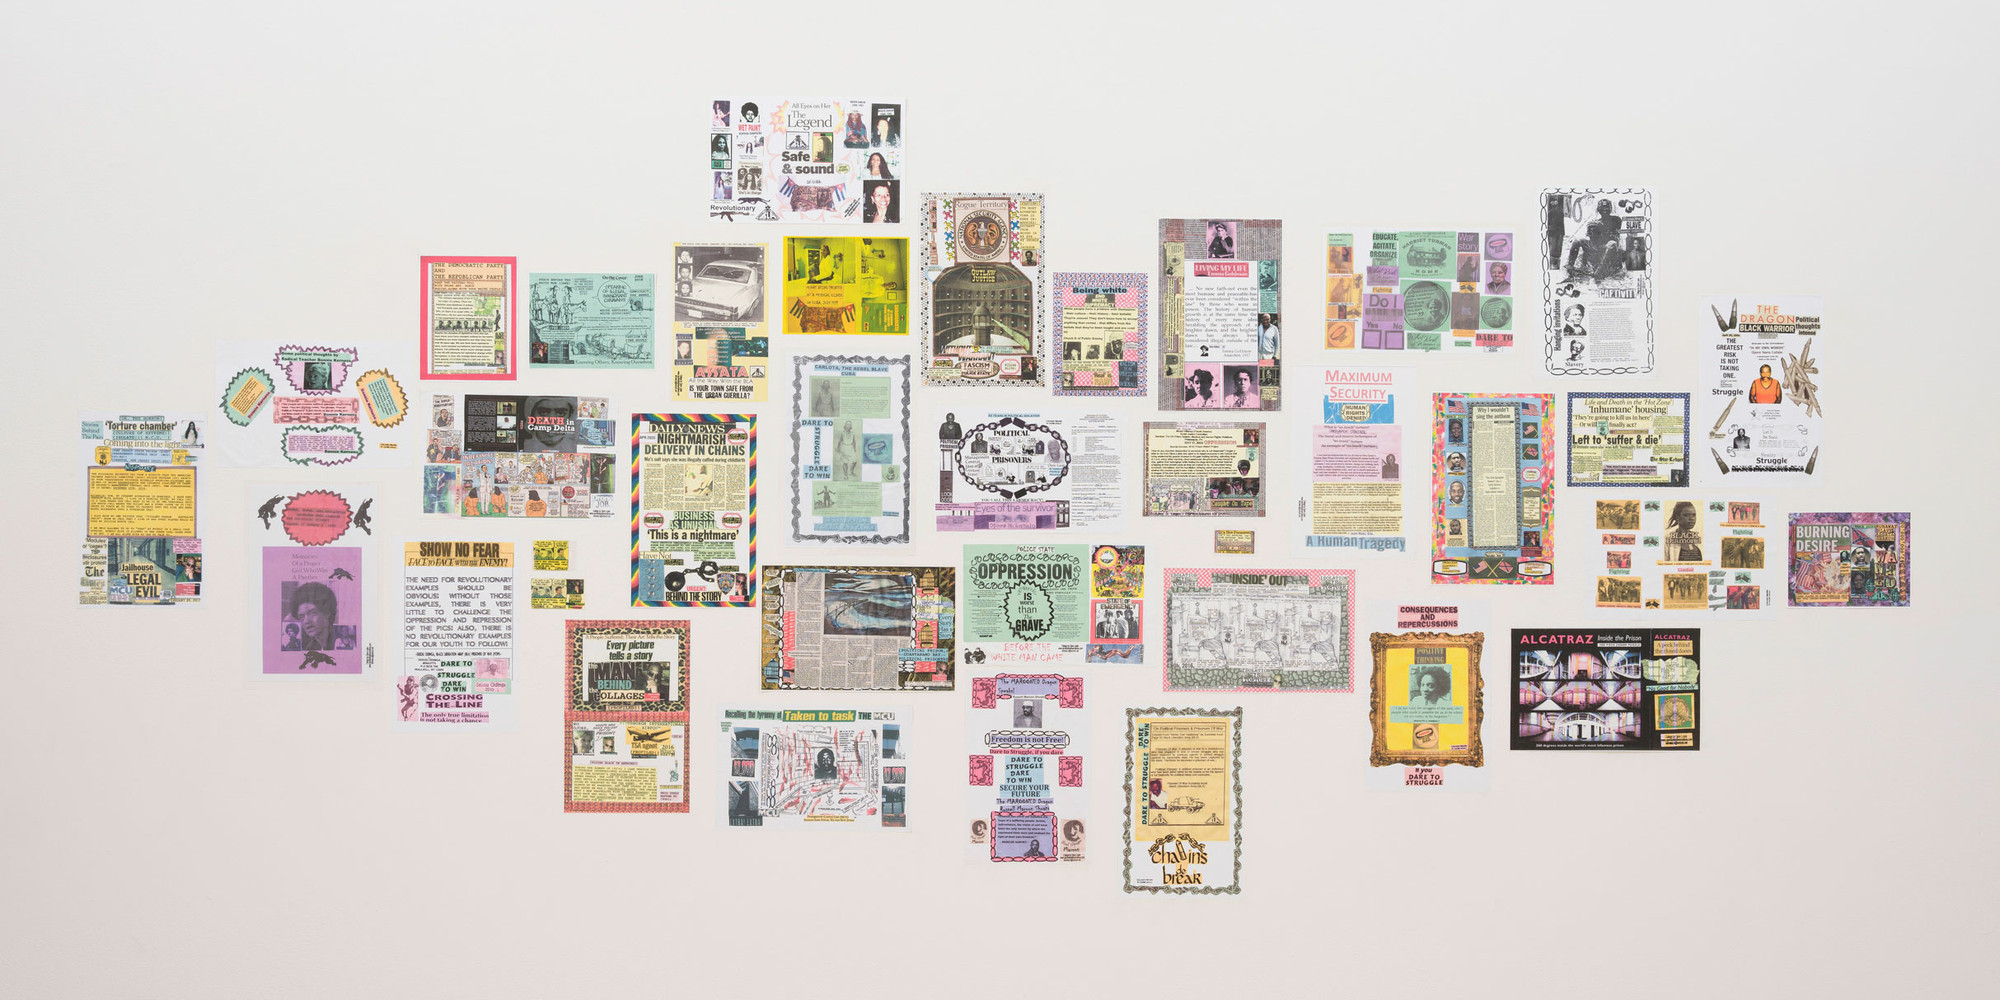 Ojore Lutalo. All works untitled. n.d. Photocopied collage posters, dimensions variable. Installation view, Marking Time: Art in the Age of Mass Incarceration, MoMA PS1, September 17, 2020–April 5, 2021. Courtesy the artist